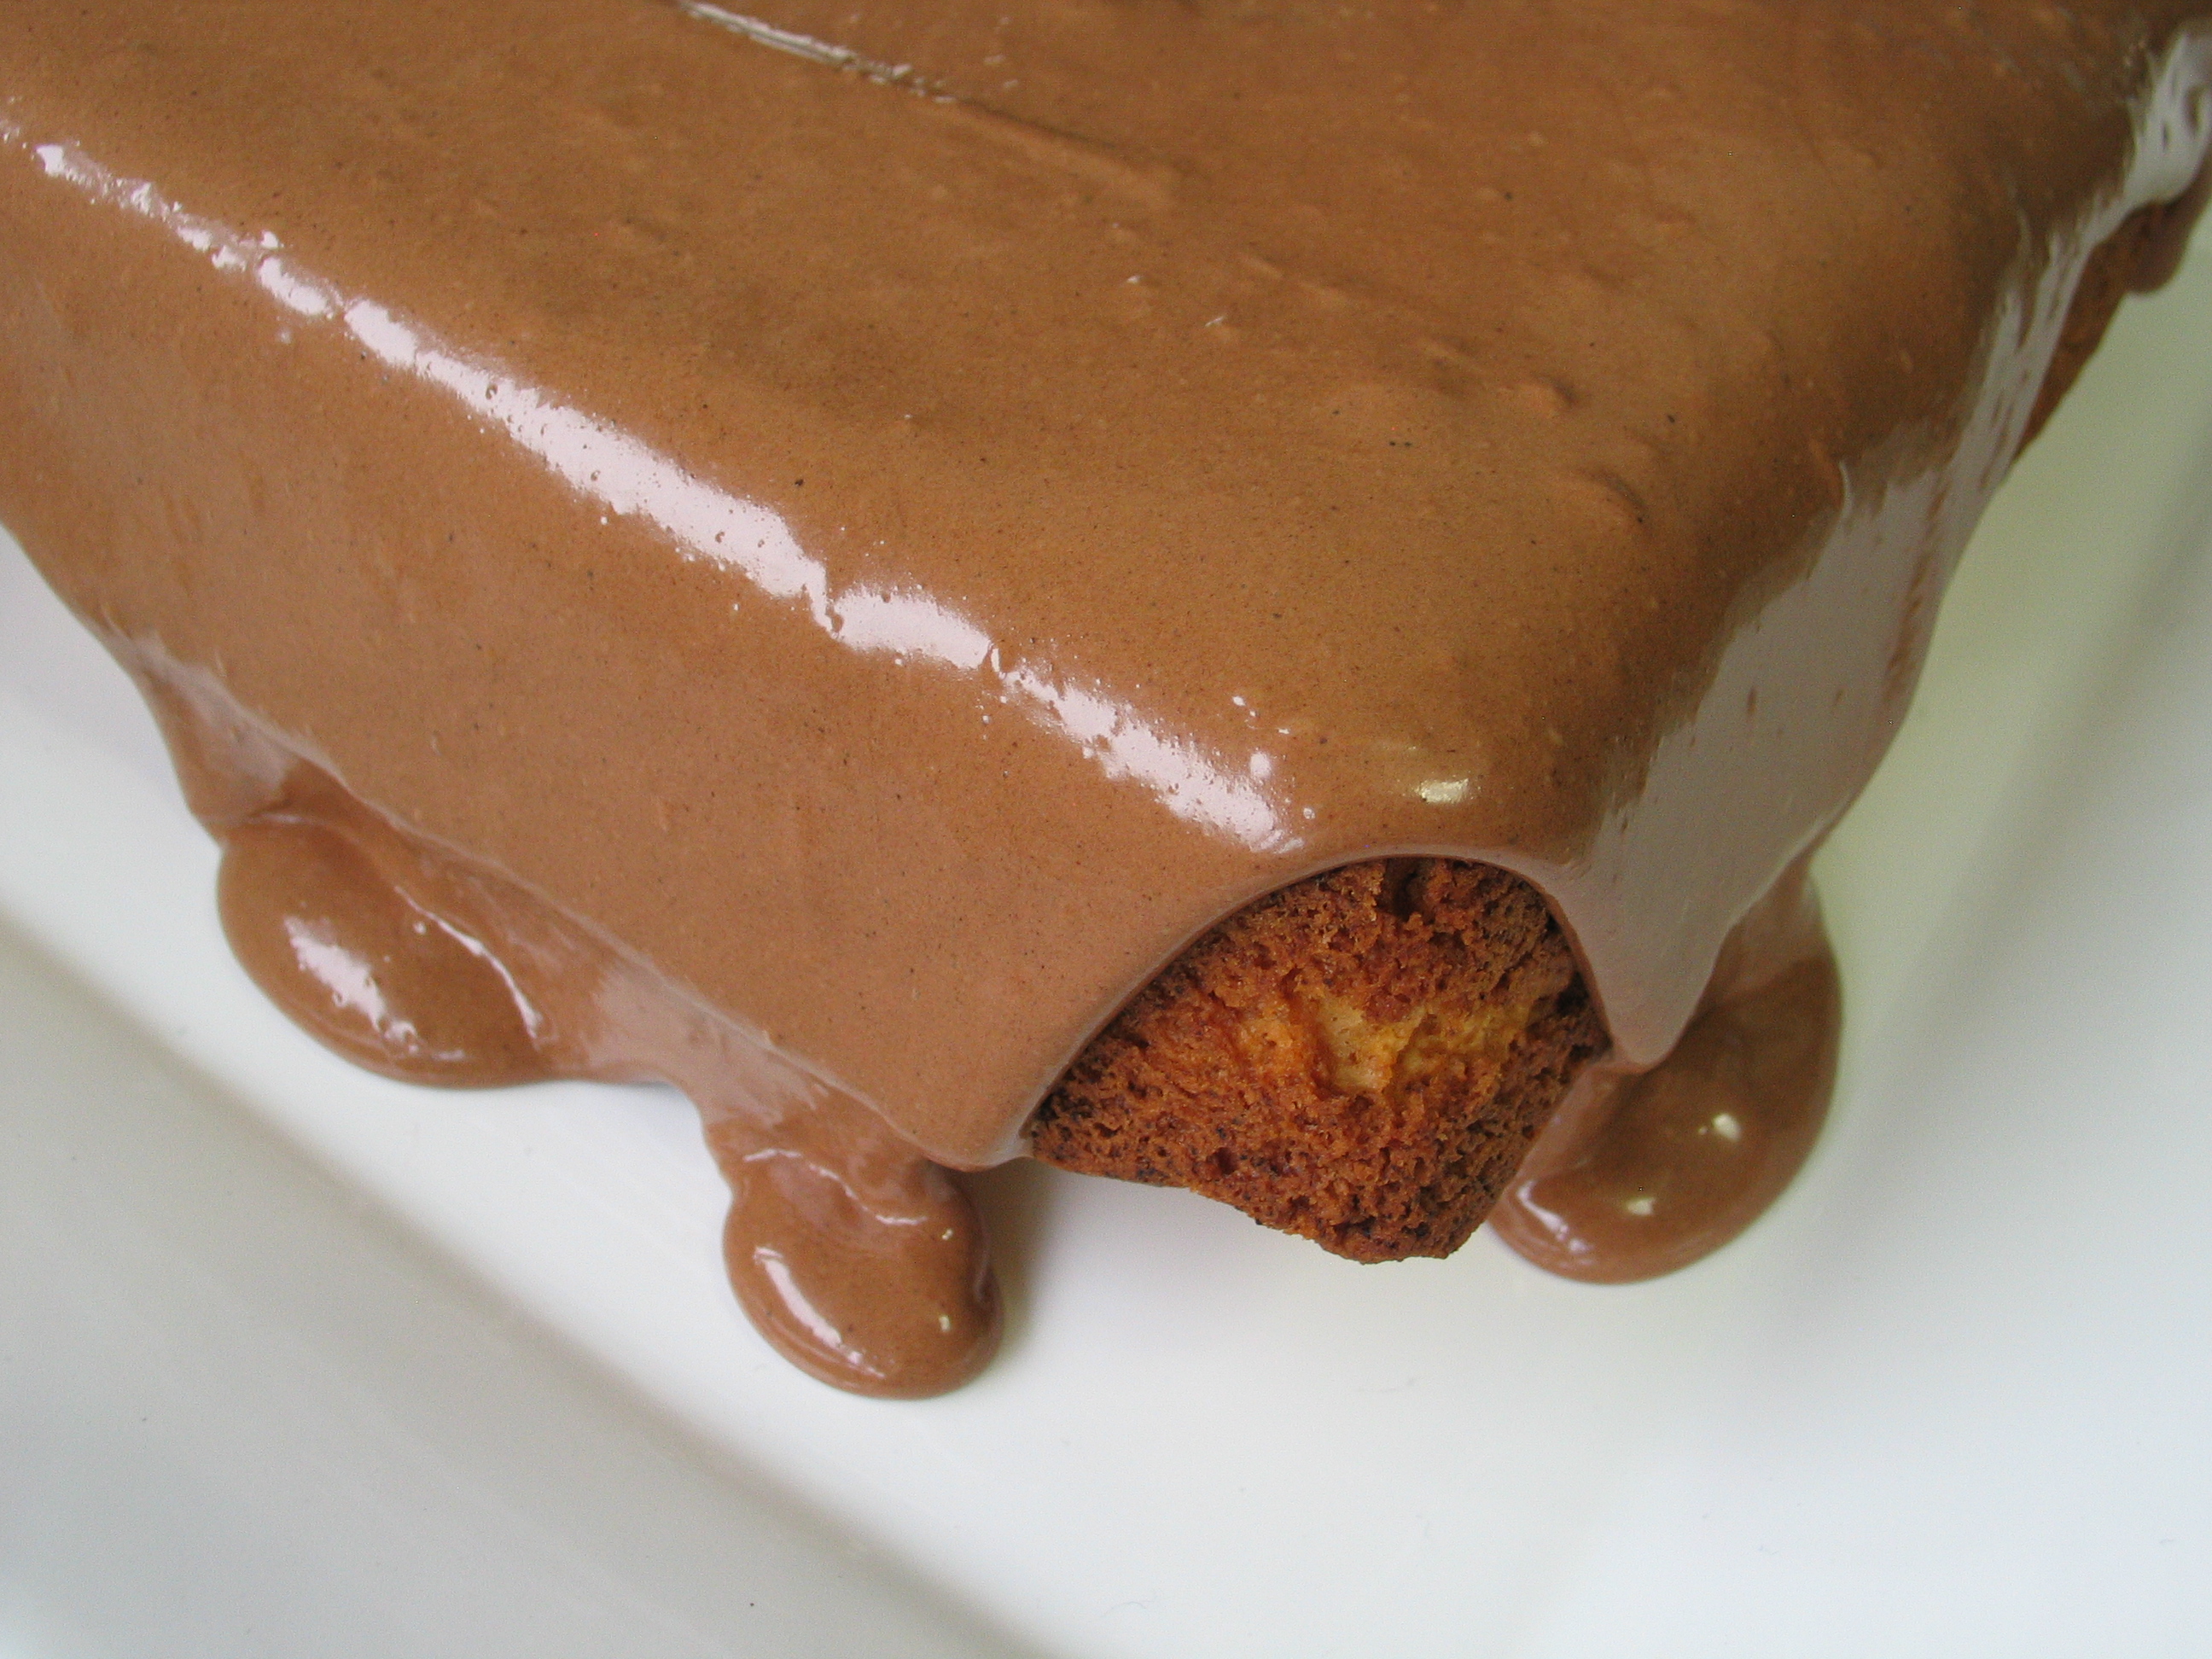 Cream Cake with Chocolate Frosting